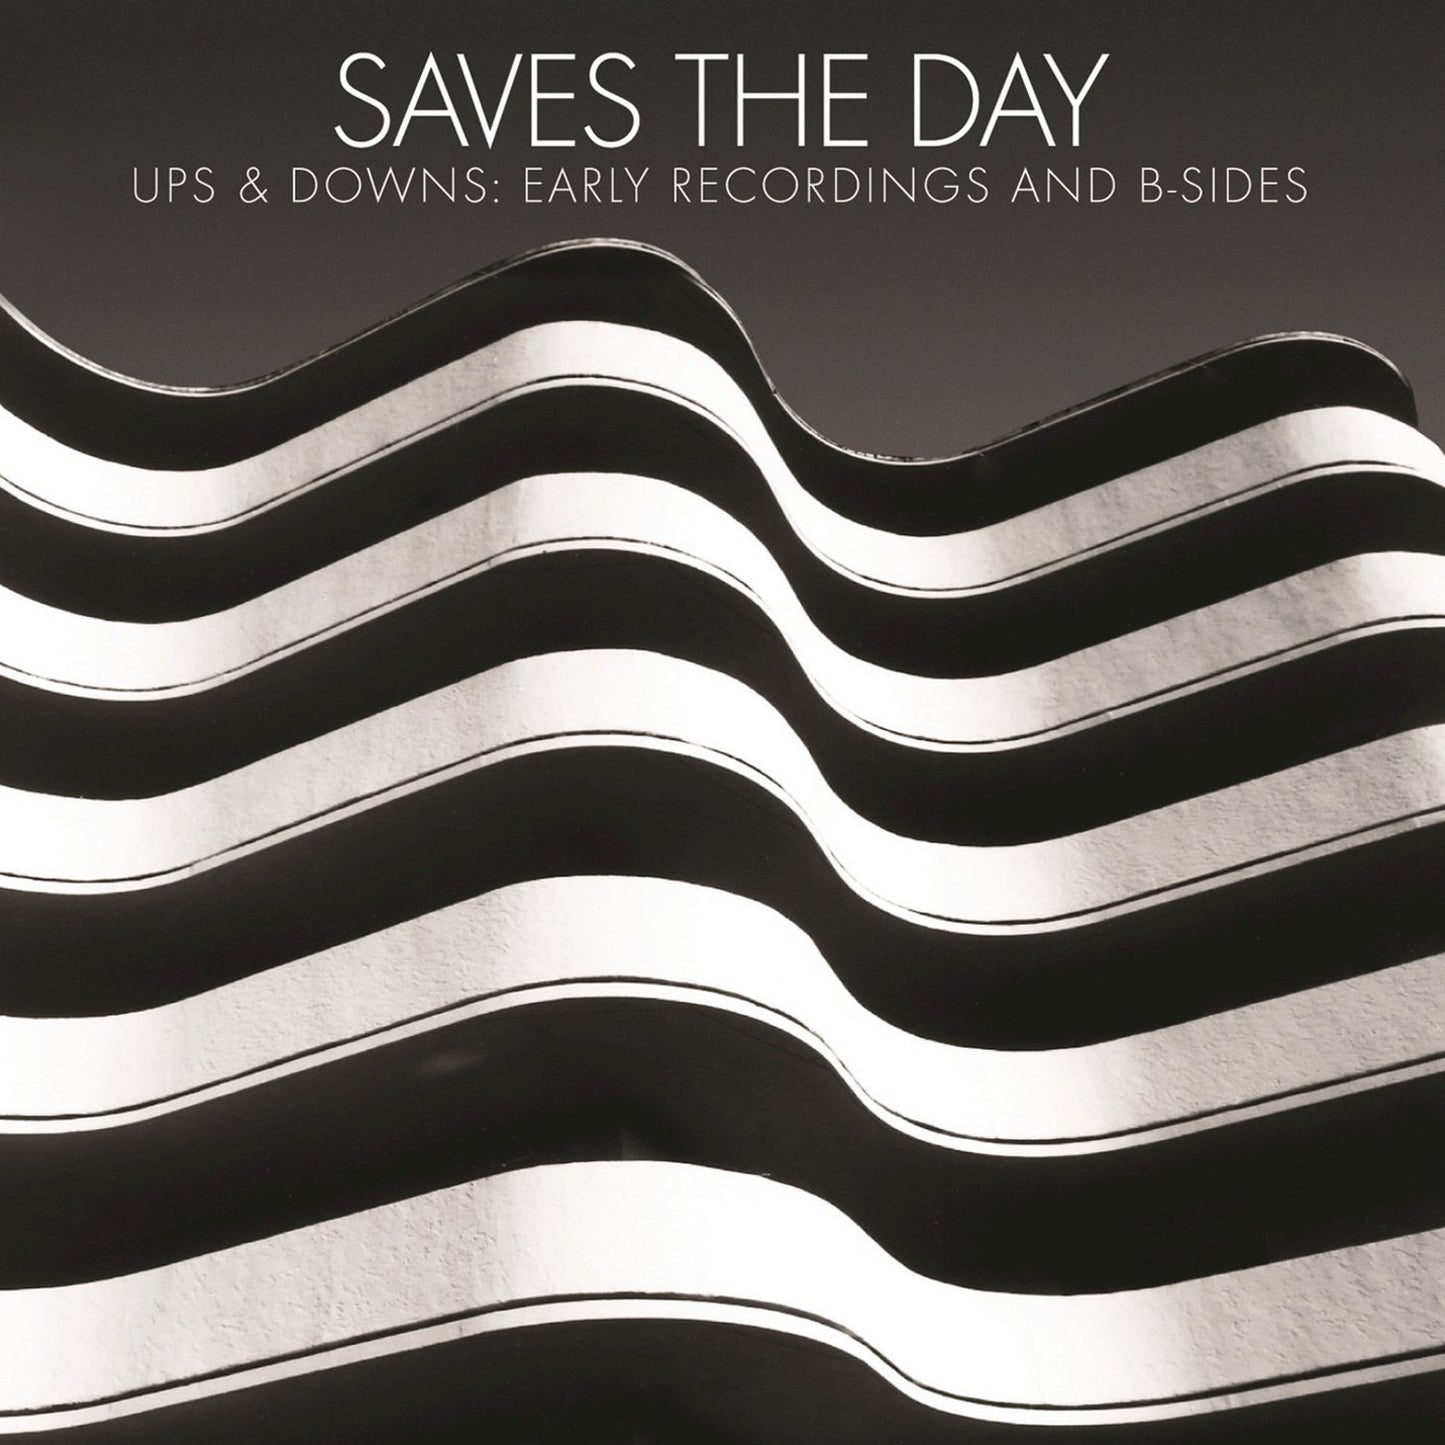 Saves The Day "Ups & Downs: Early Recordings and B-Sides" LP (White Vinyl)